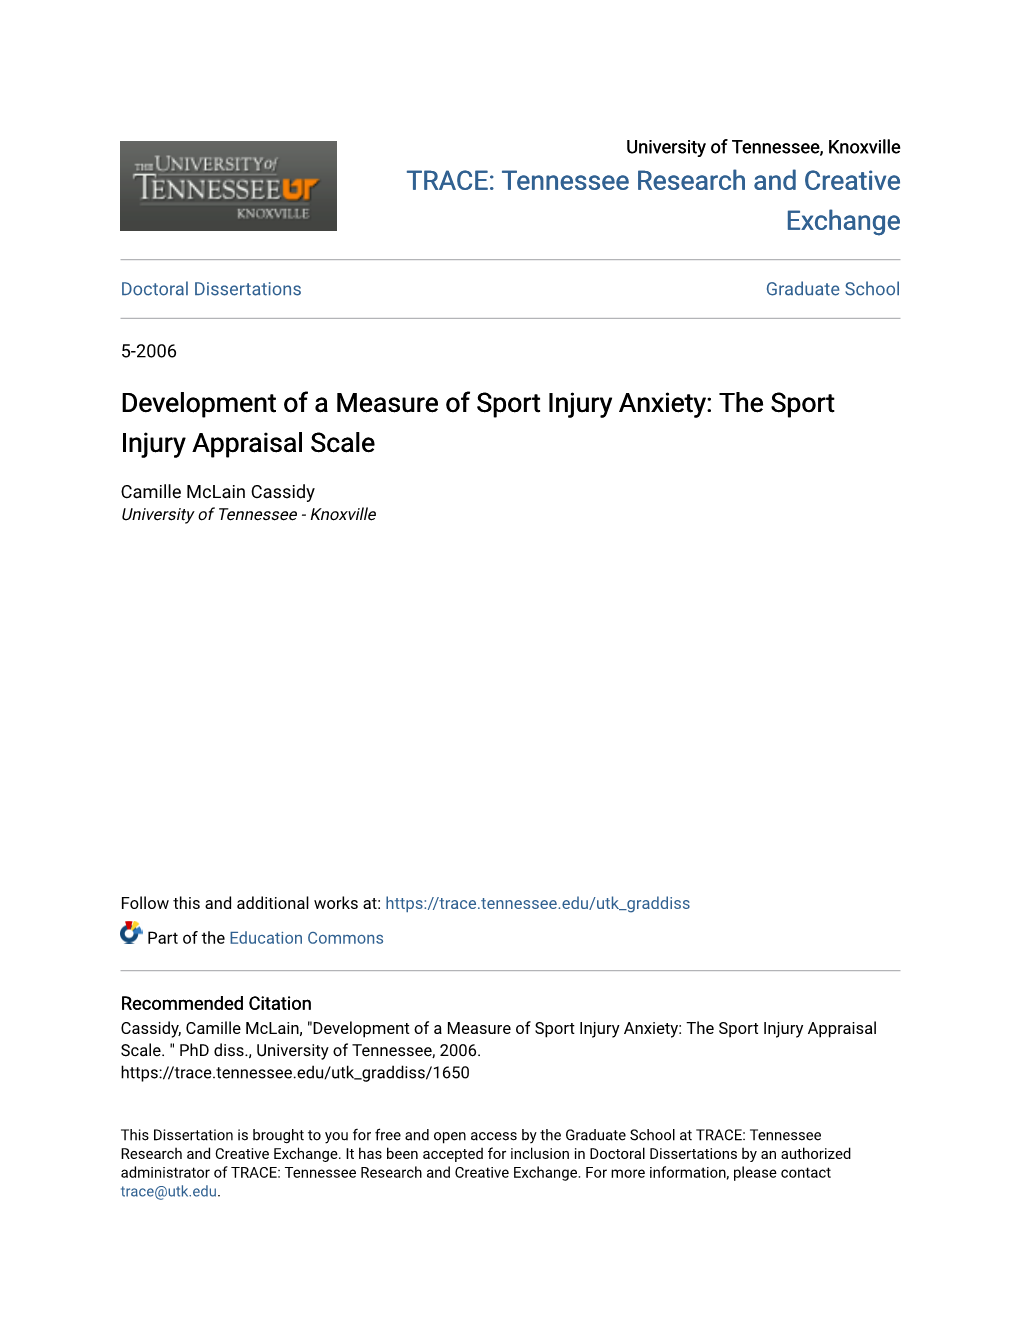 Development of a Measure of Sport Injury Anxiety: the Sport Injury Appraisal Scale